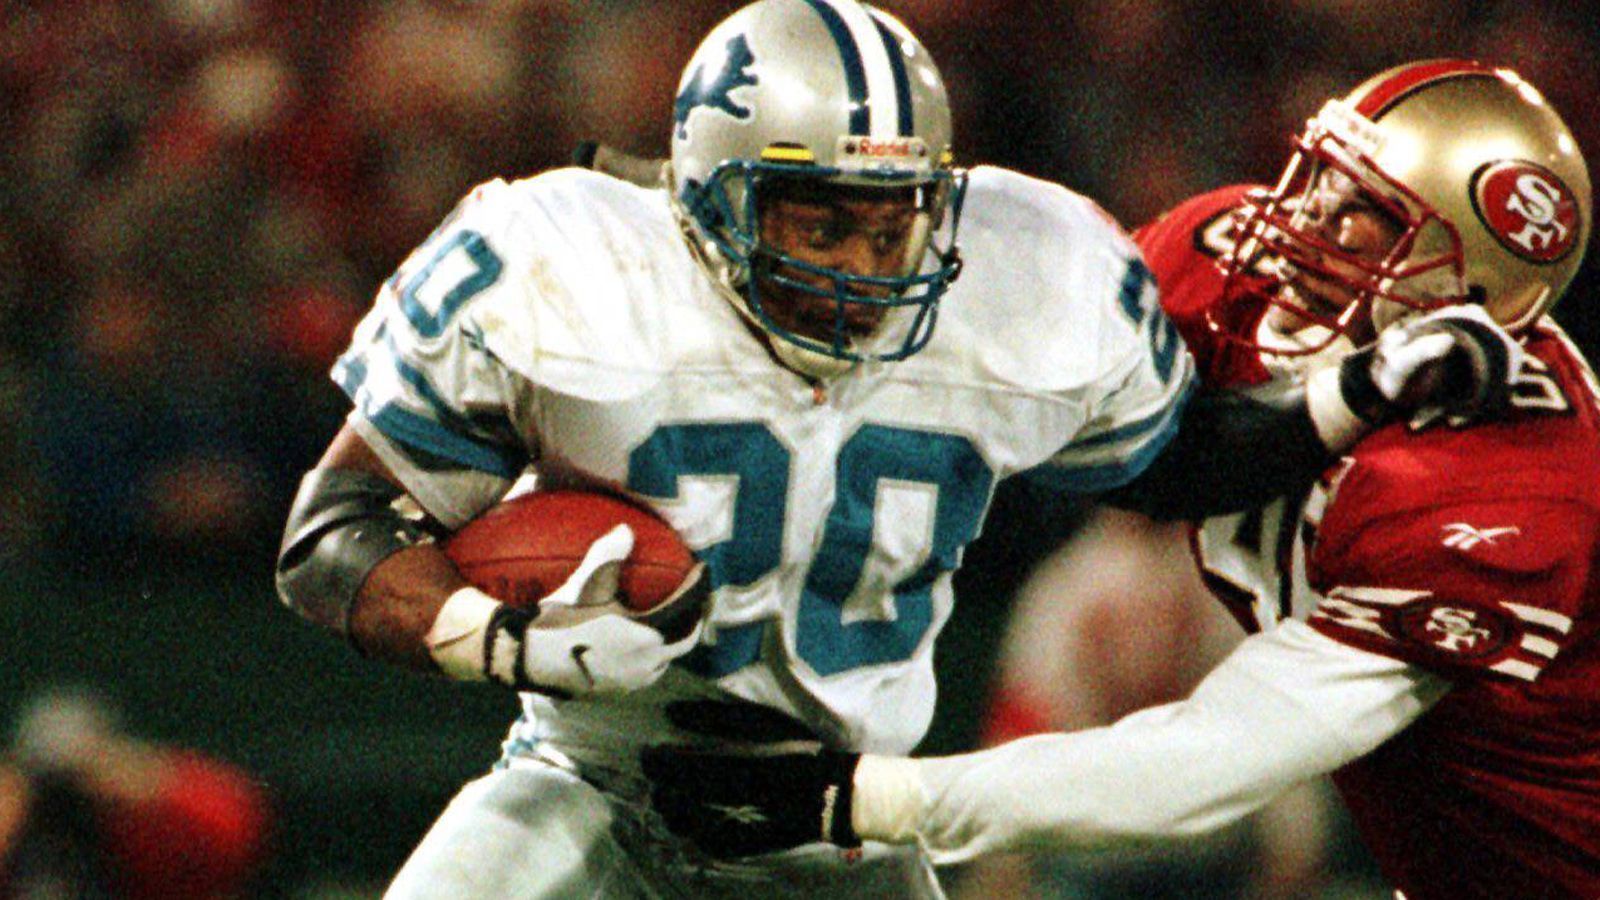 
                <strong>4. Barry Sanders</strong><br>
                Yards: 2.053Team: Detroit LionsSaison: 1997
              